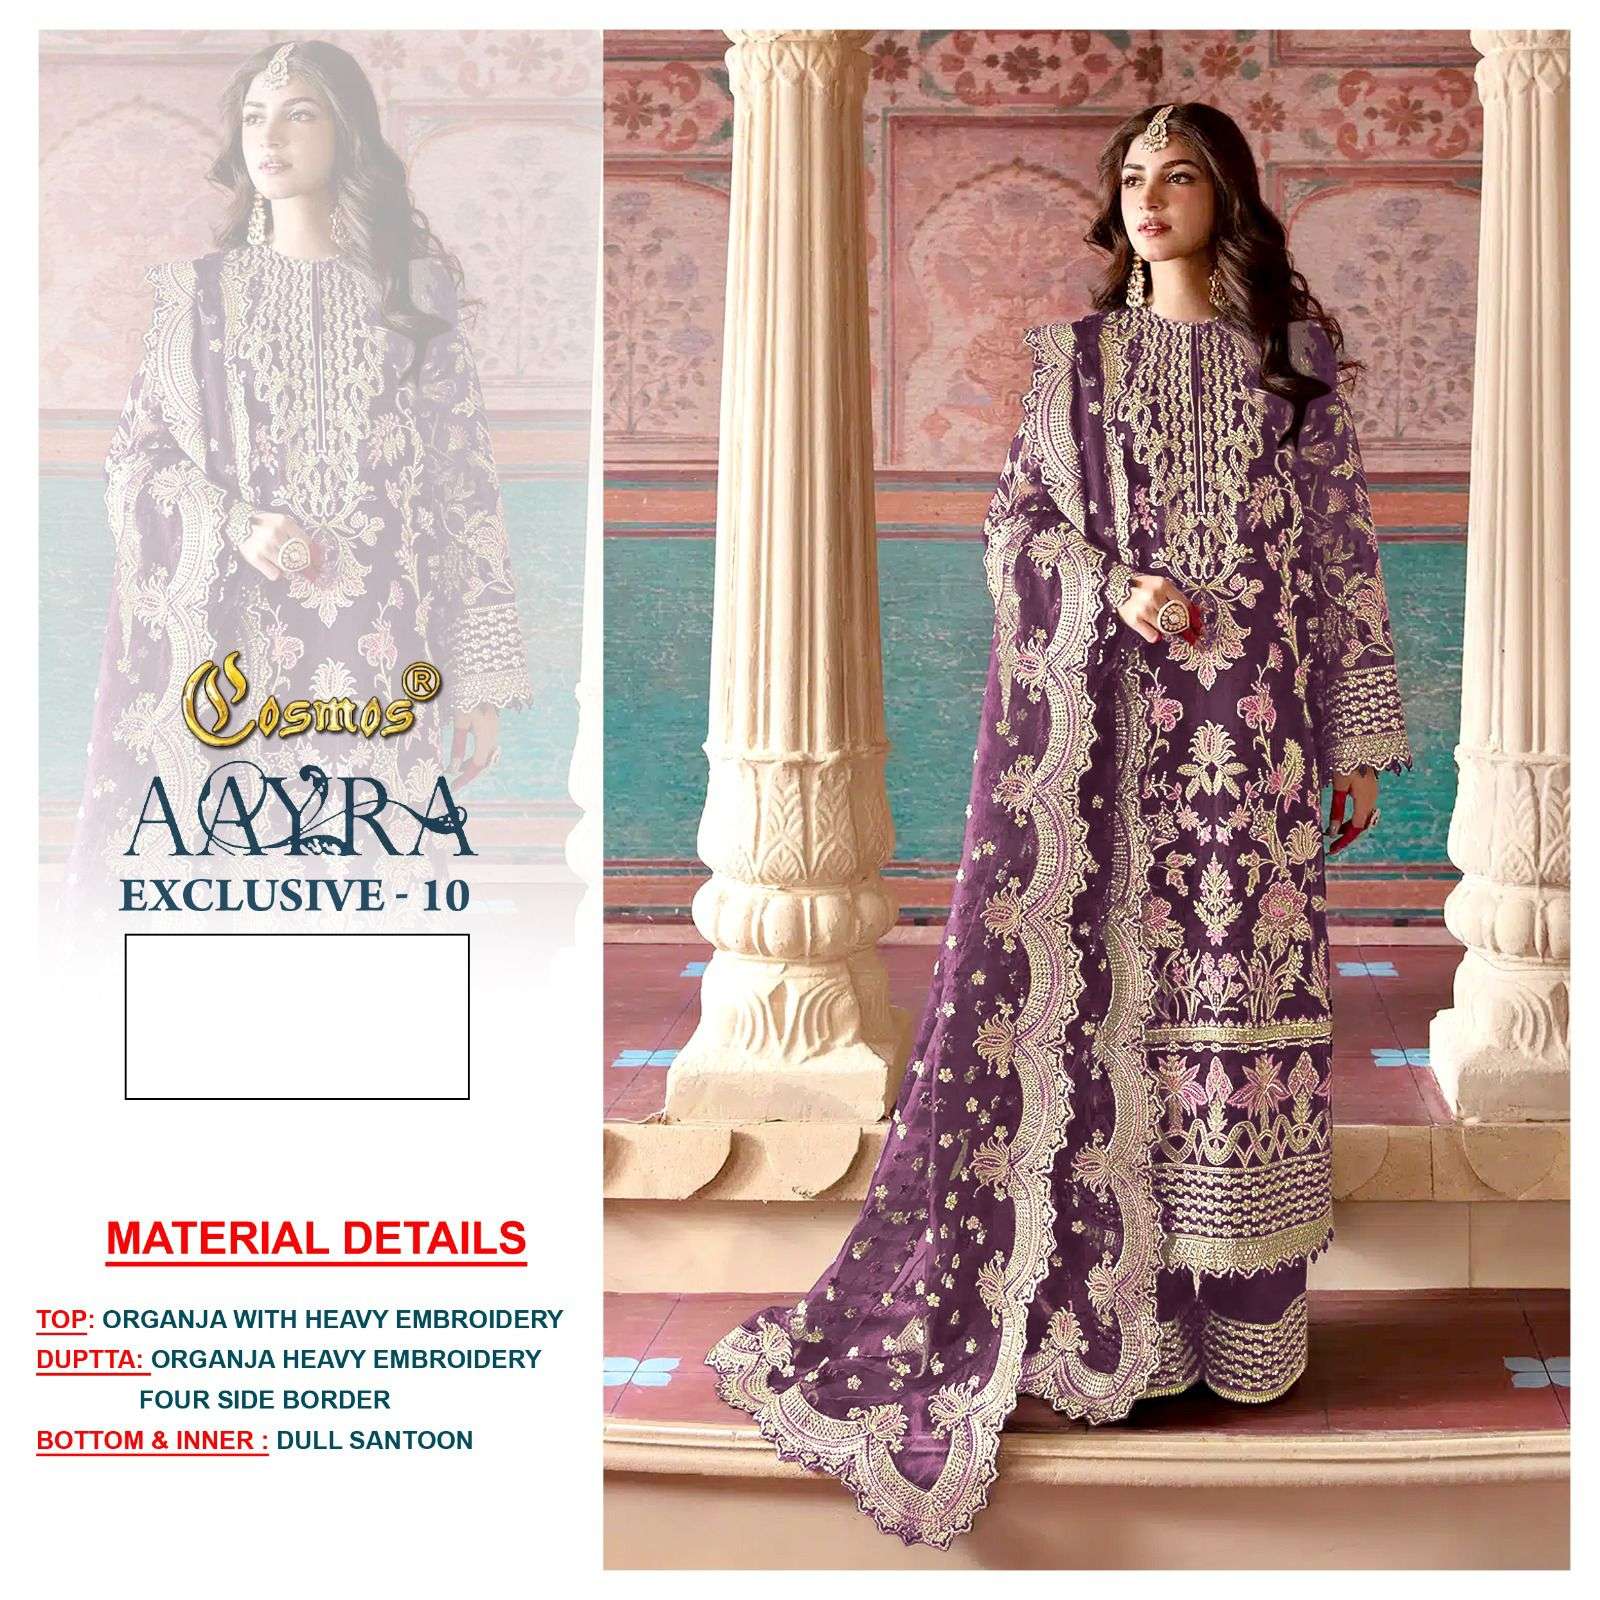 AAYRA EXCLUSIVE-10 BY COSMOS DESIGNER ORGANZA EMBROIDERY PAKISTANI DRESS